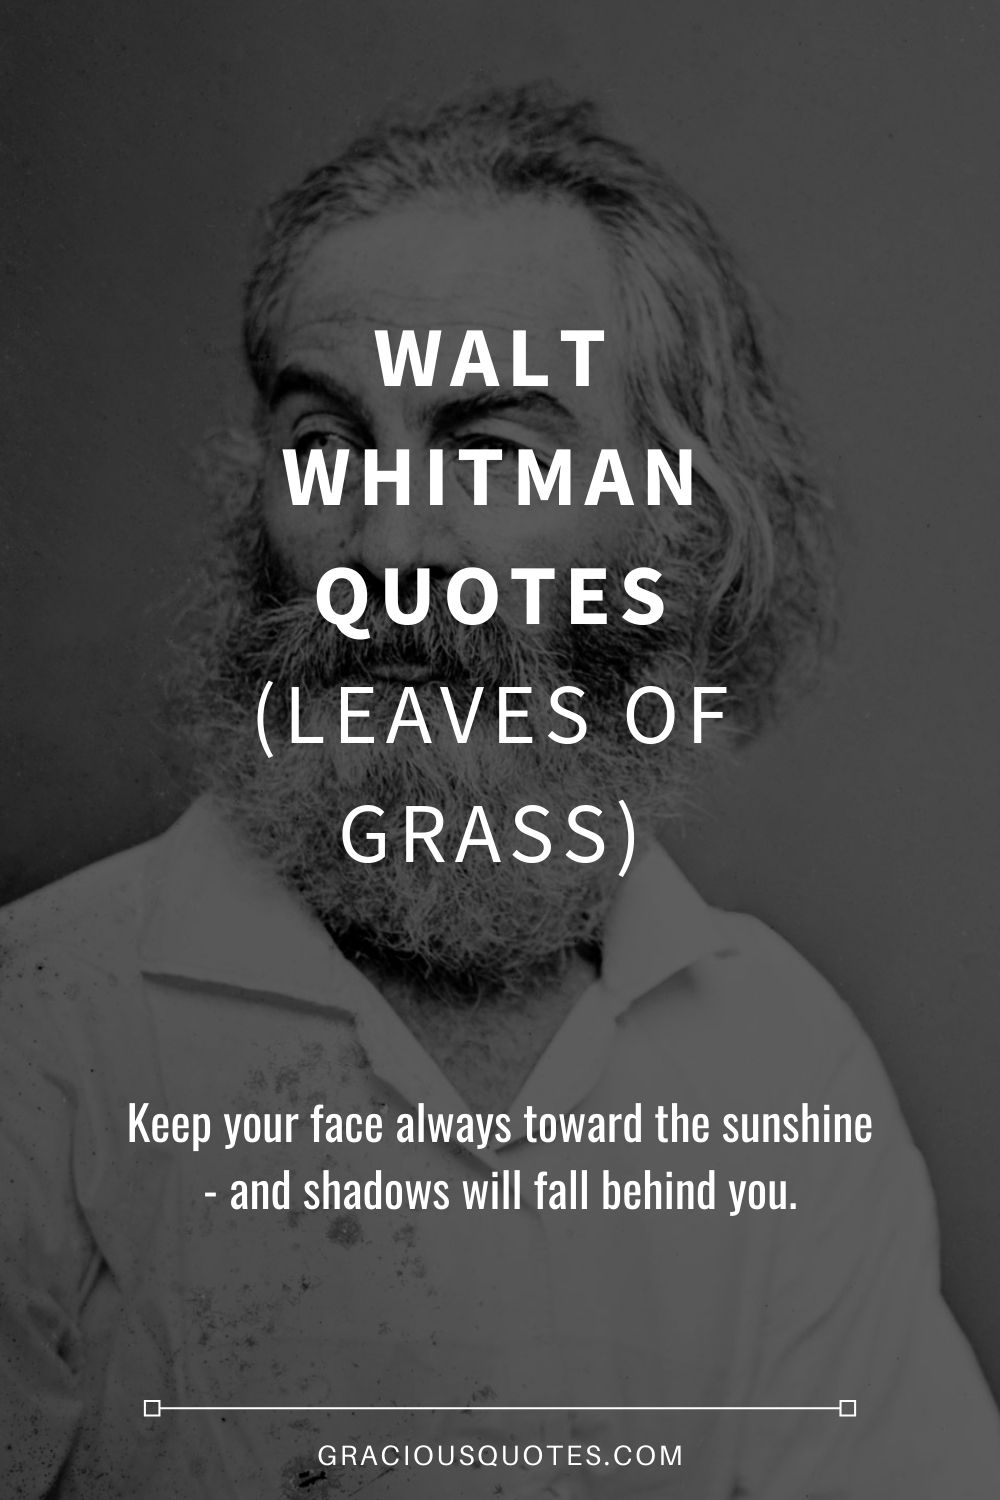 Walt Whitman Quotes (LEAVES OF GRASS) - Gracious Quotes